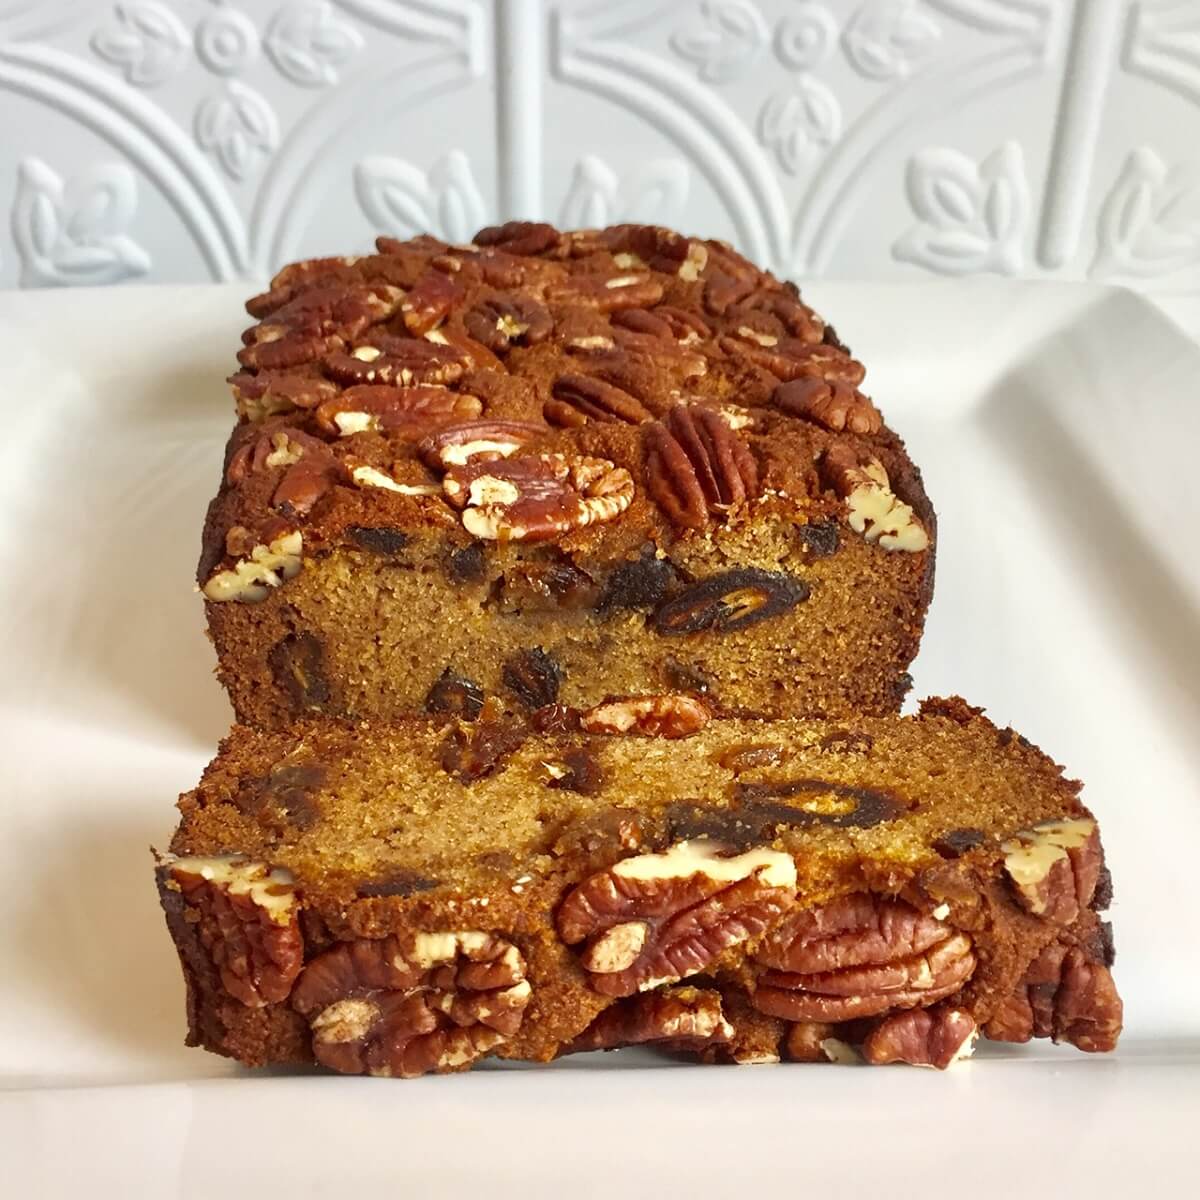 A slab of paleo fruit cake on a white platter with a slice cut off.